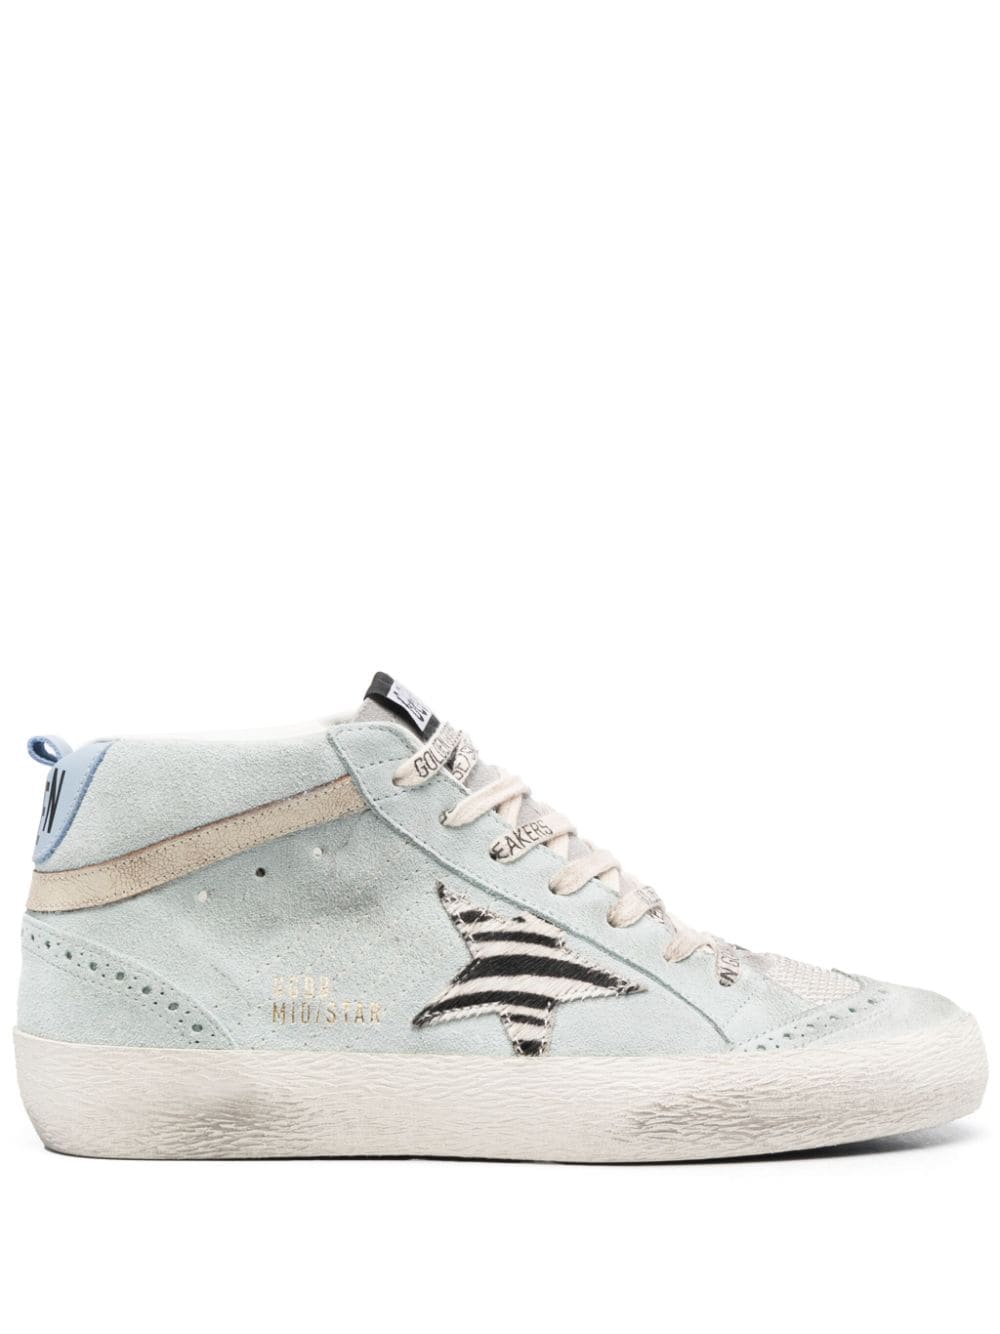 GOLDEN GOOSE Fall Fashion Must-Have: Women's Midstar Sneaker in Golden Hues